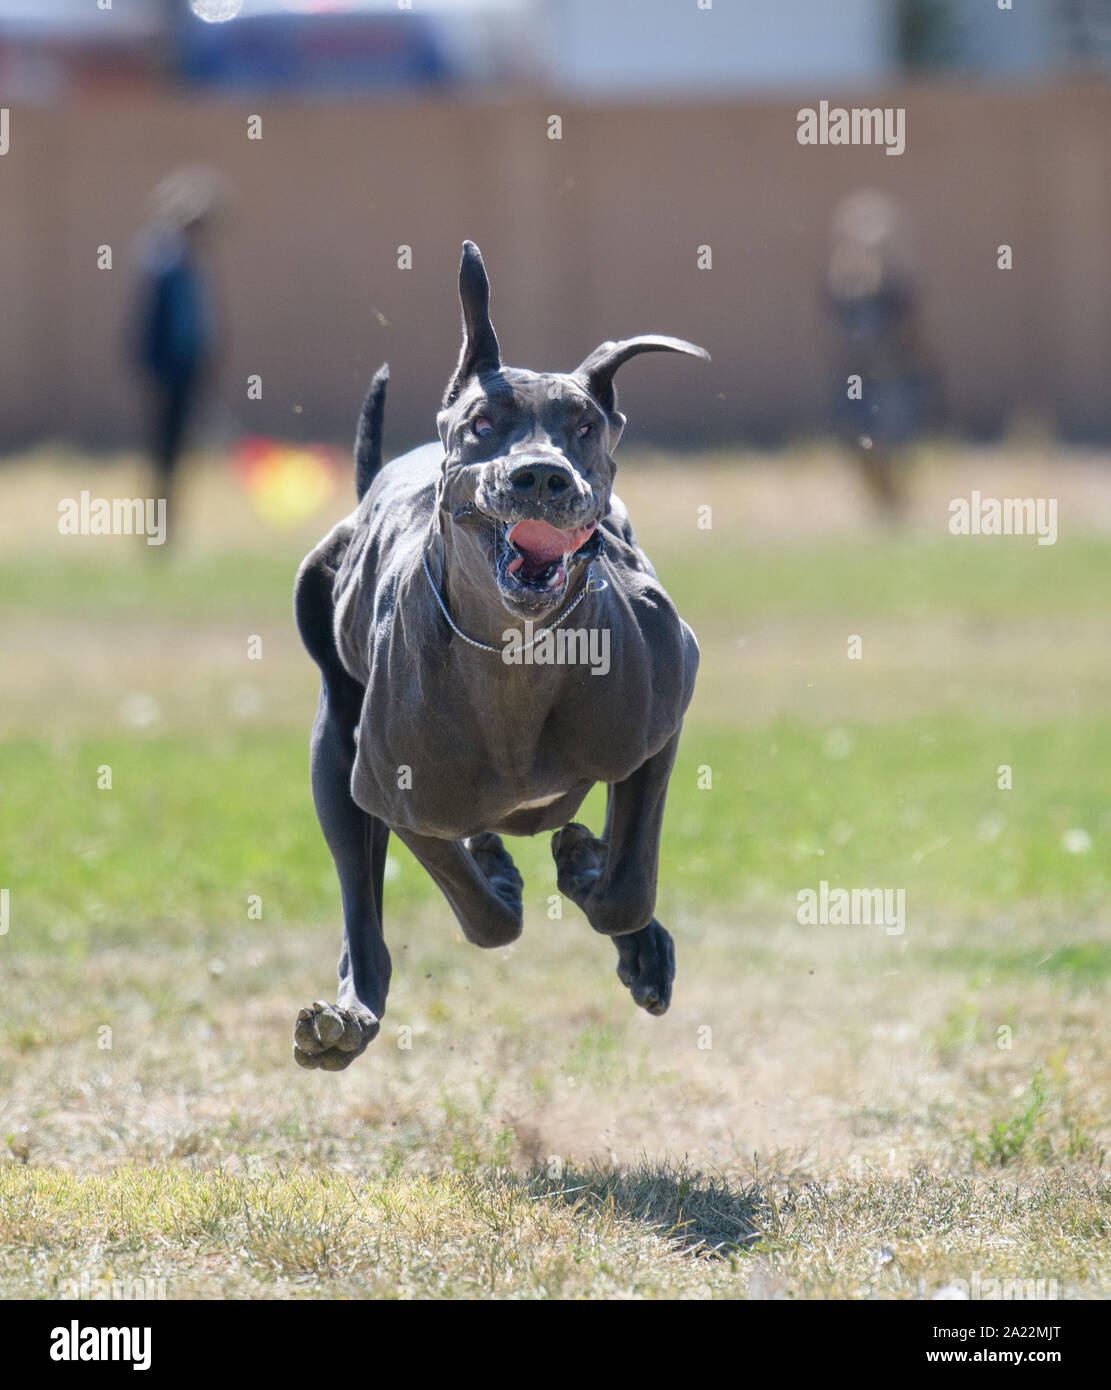 Gray Great Dane dog chasing a lure across a field and making a funny face Stock Photo